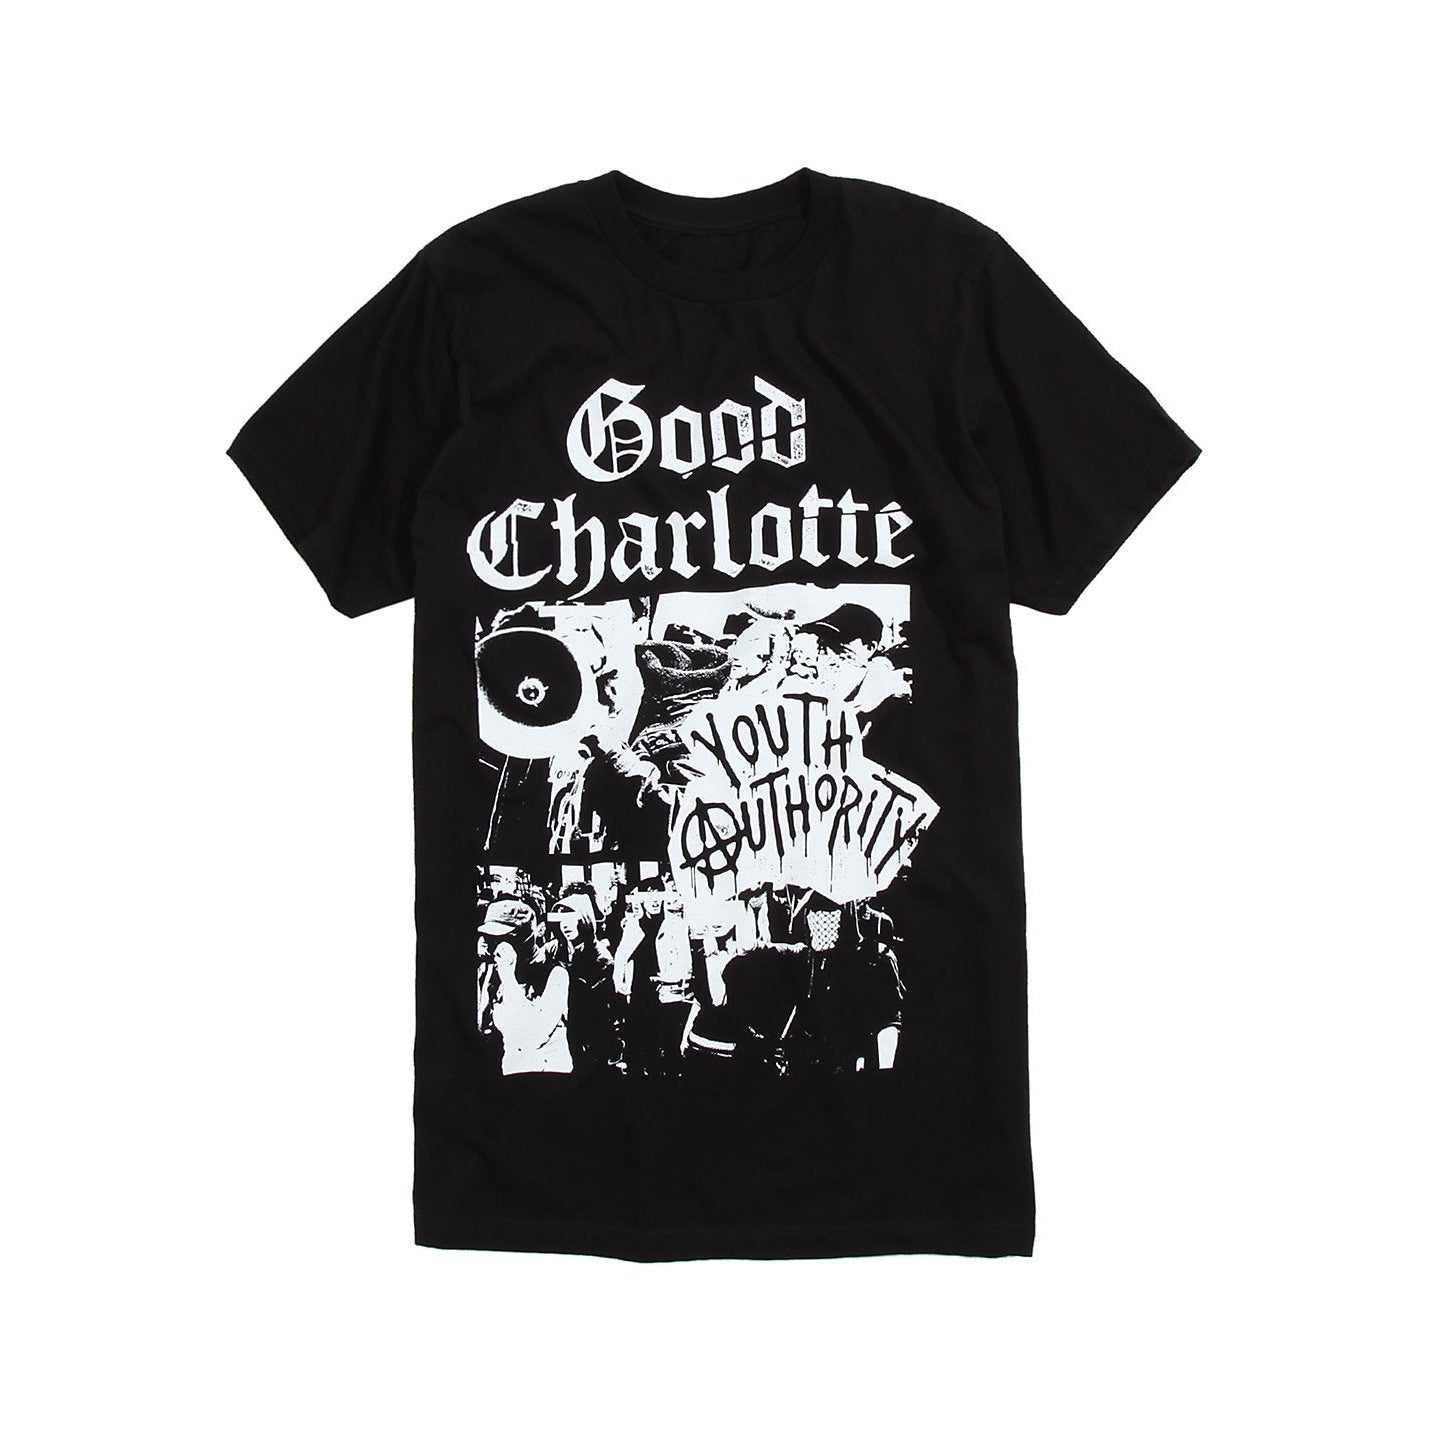 Good Charlotte - Youth Authority Riot T-shirt